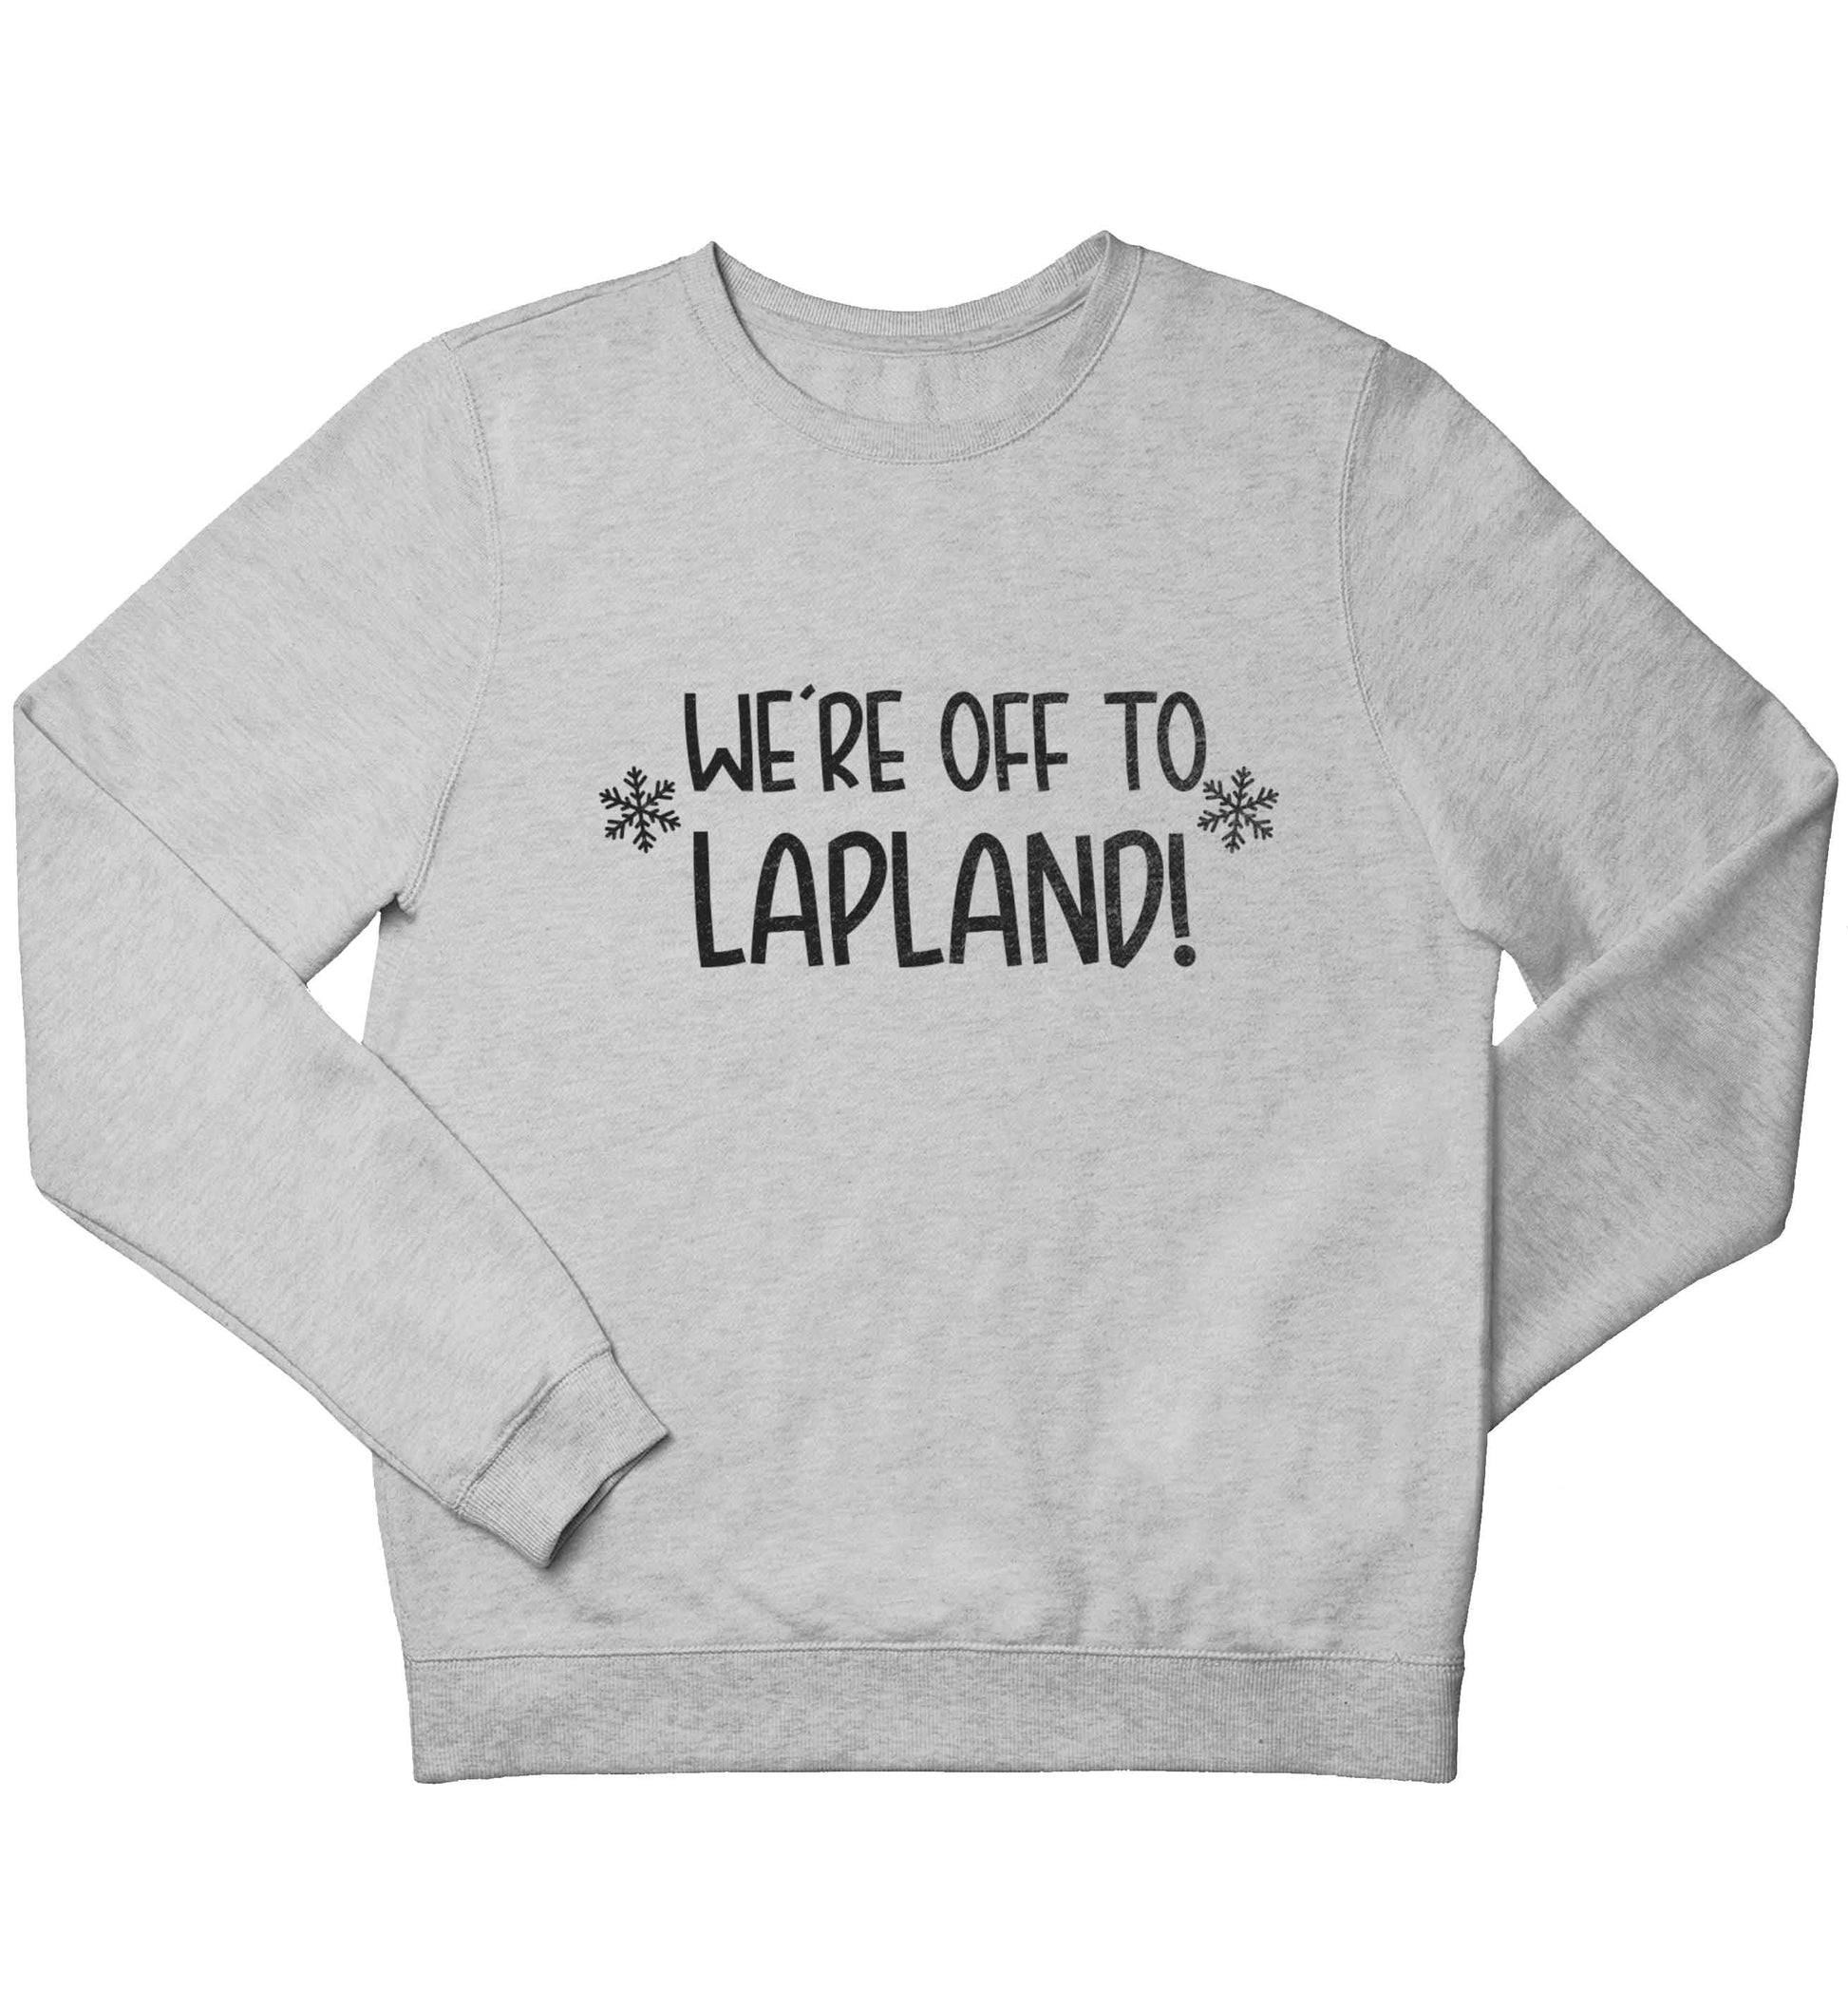 We're off to Lapland children's grey sweater 12-13 Years